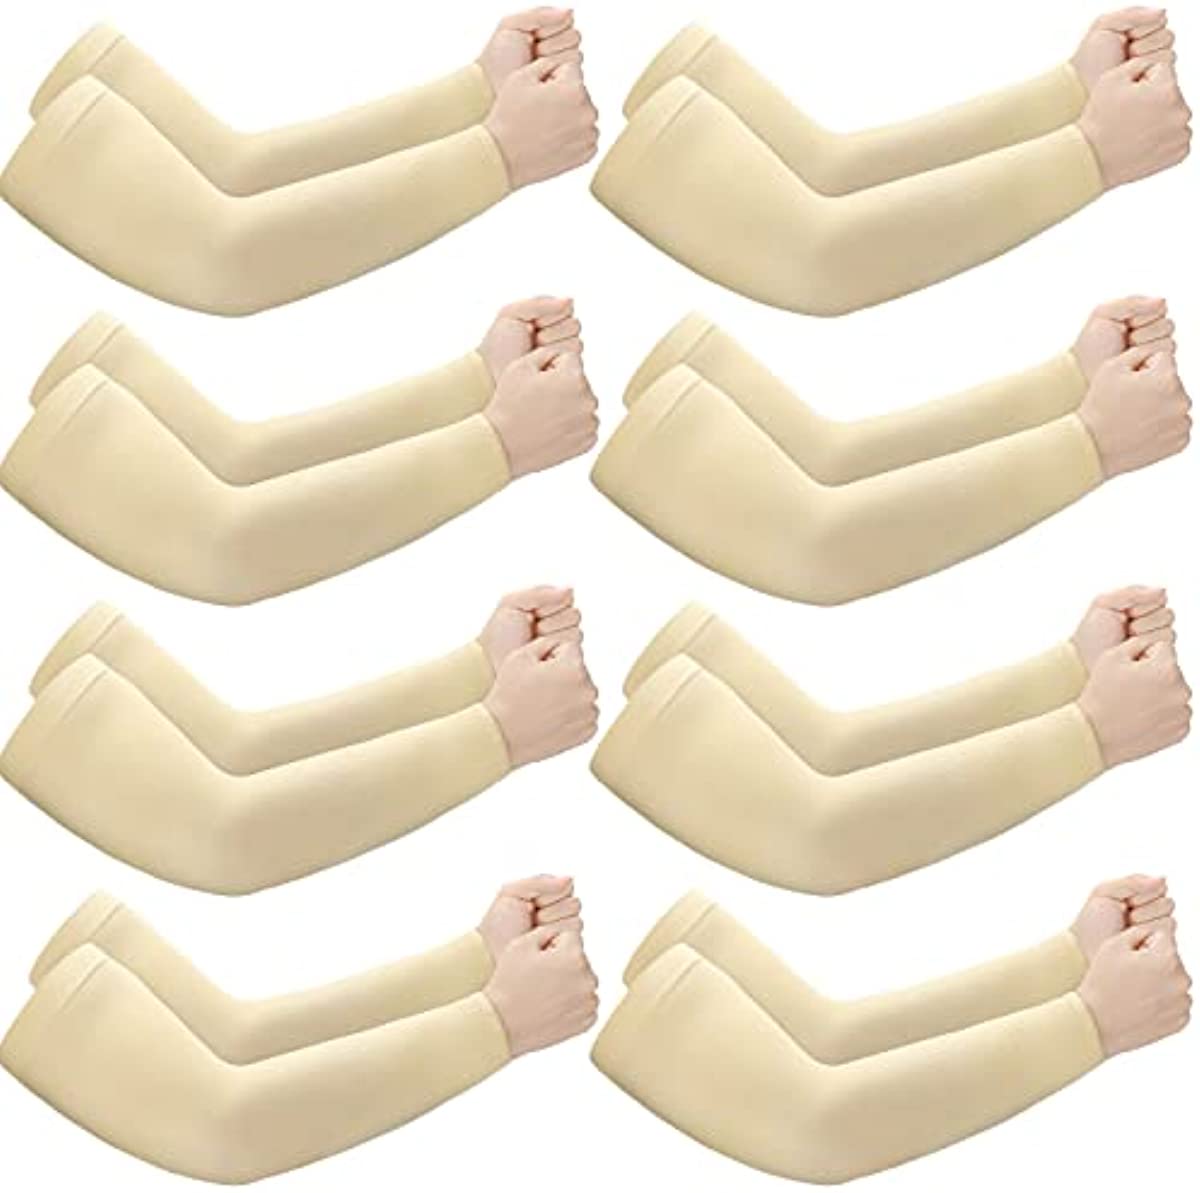 8 Pairs Elderly Skin Thin Protector Sleeves Bruise Abrasions Protective Arm Sleeve